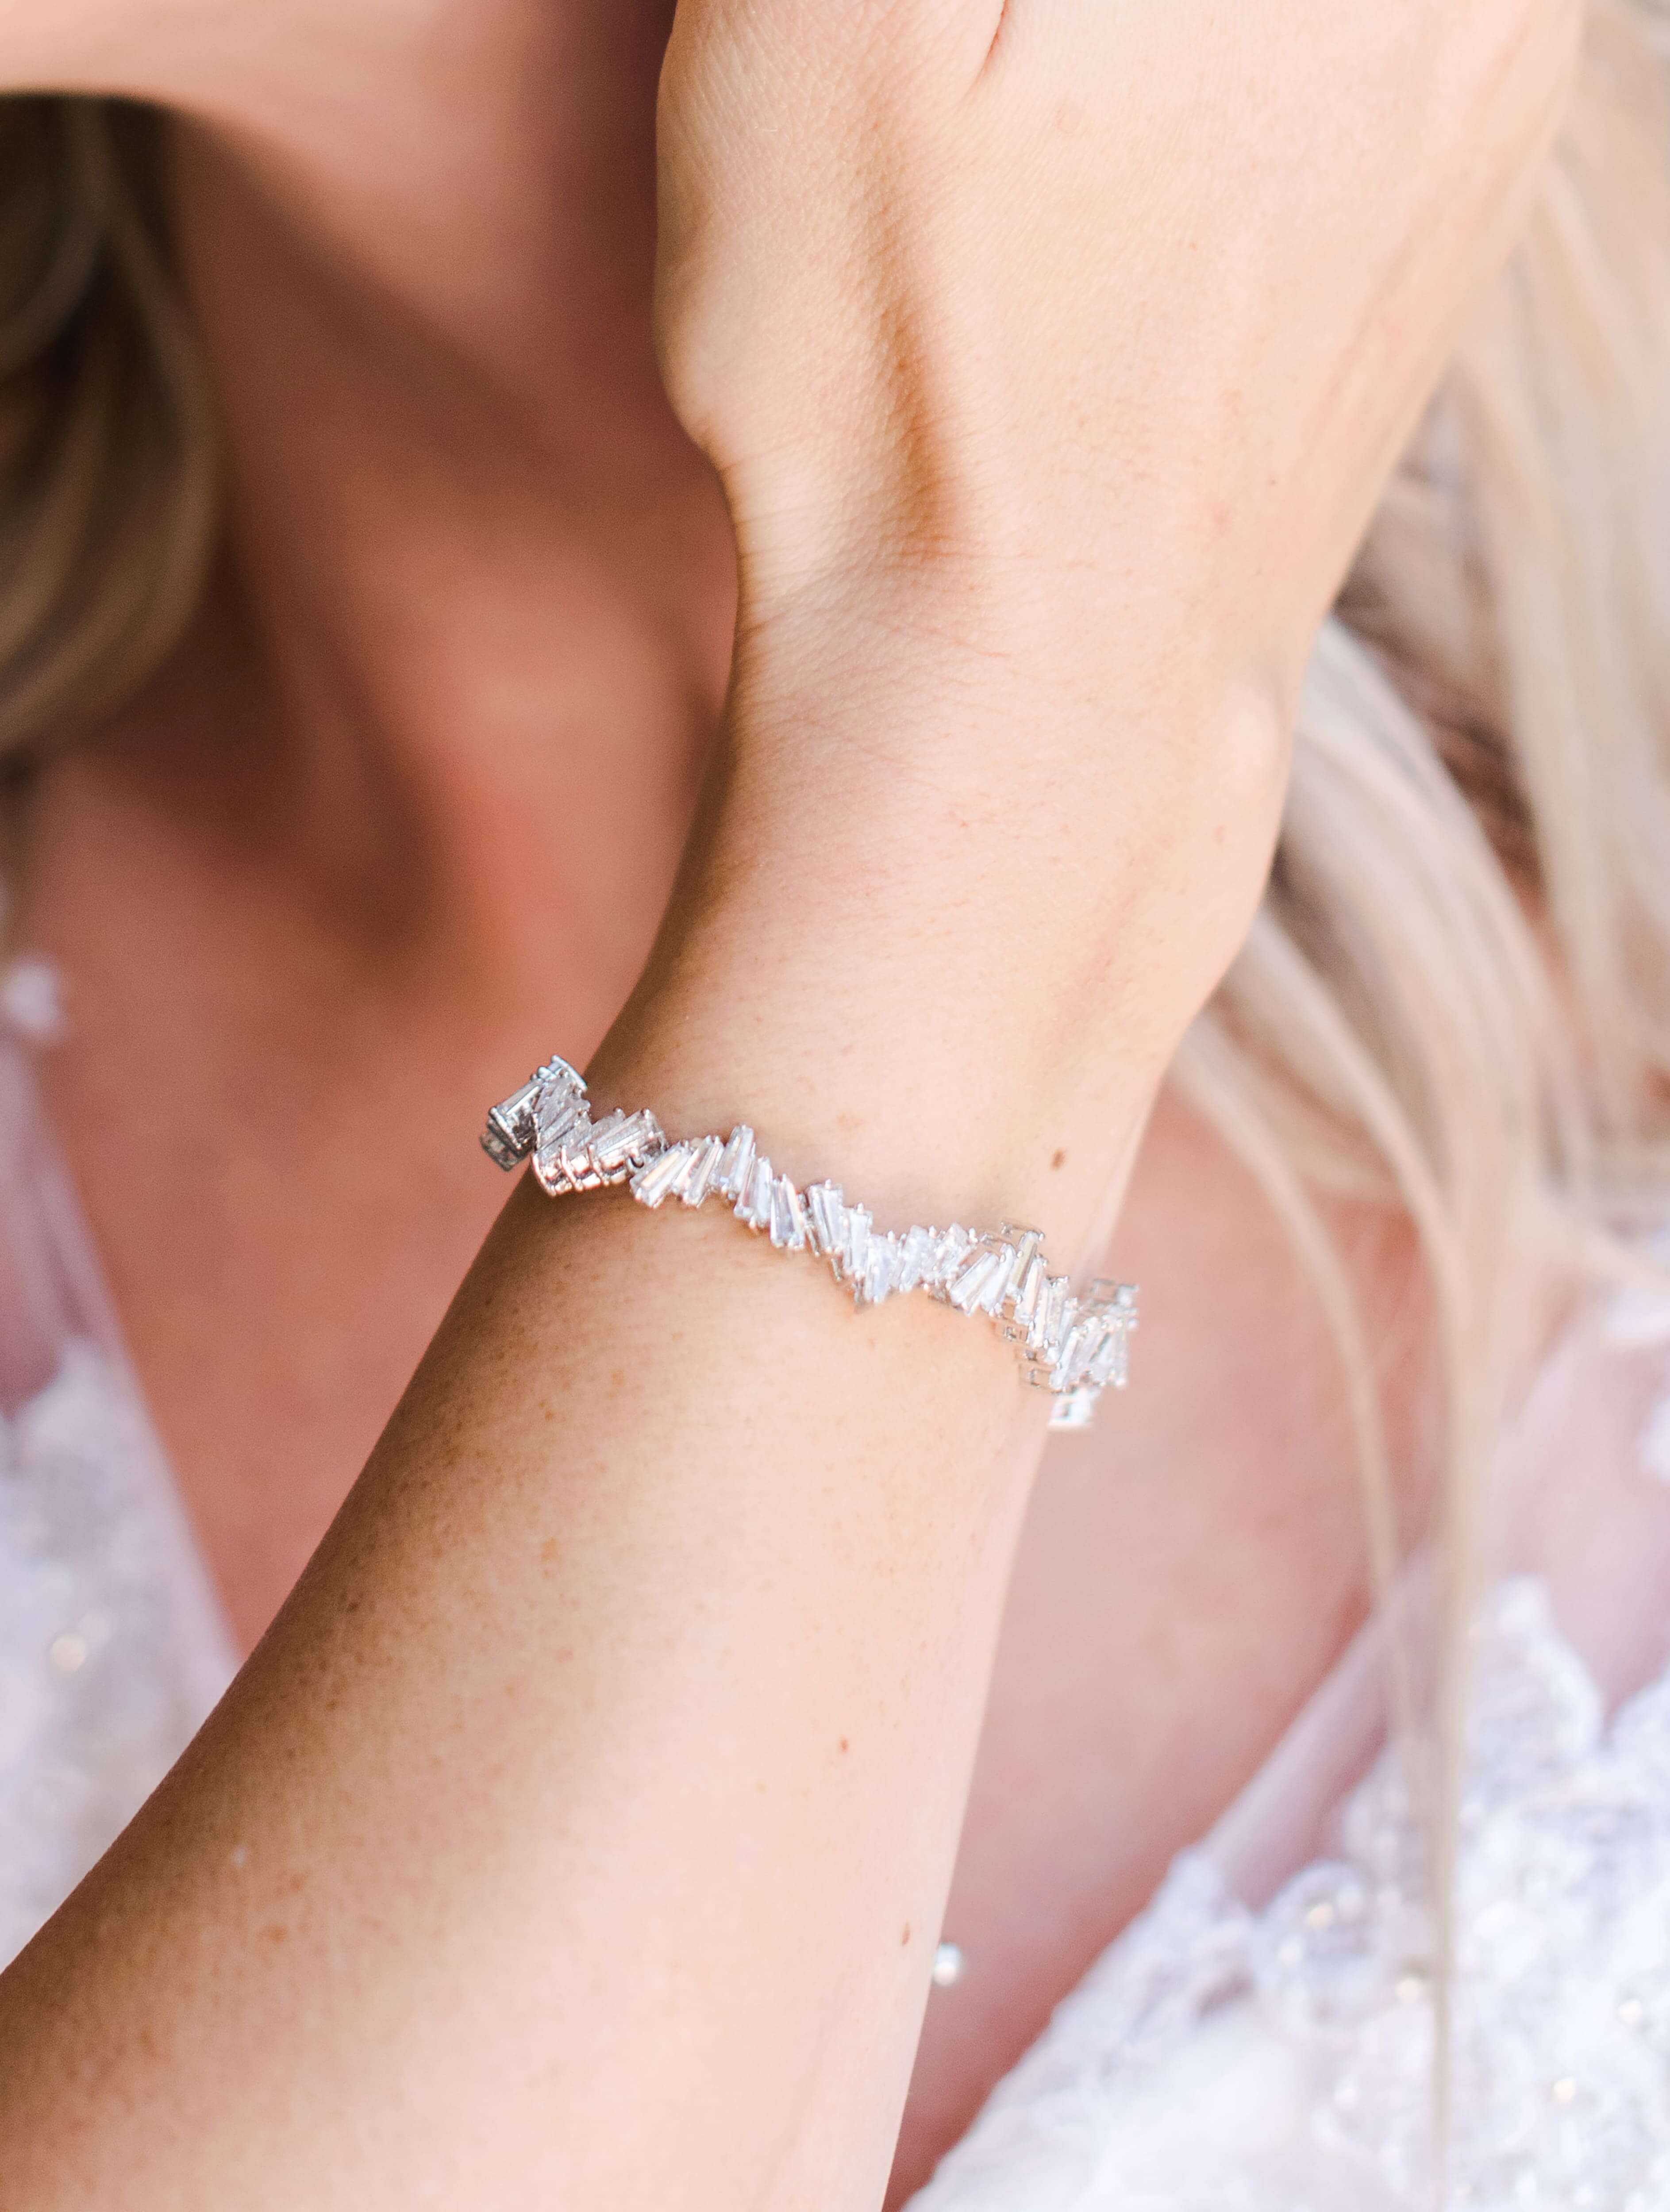 Multiple views of the Sparkly Dainty Bracelet, showcasing its delicate design and sparkling details.